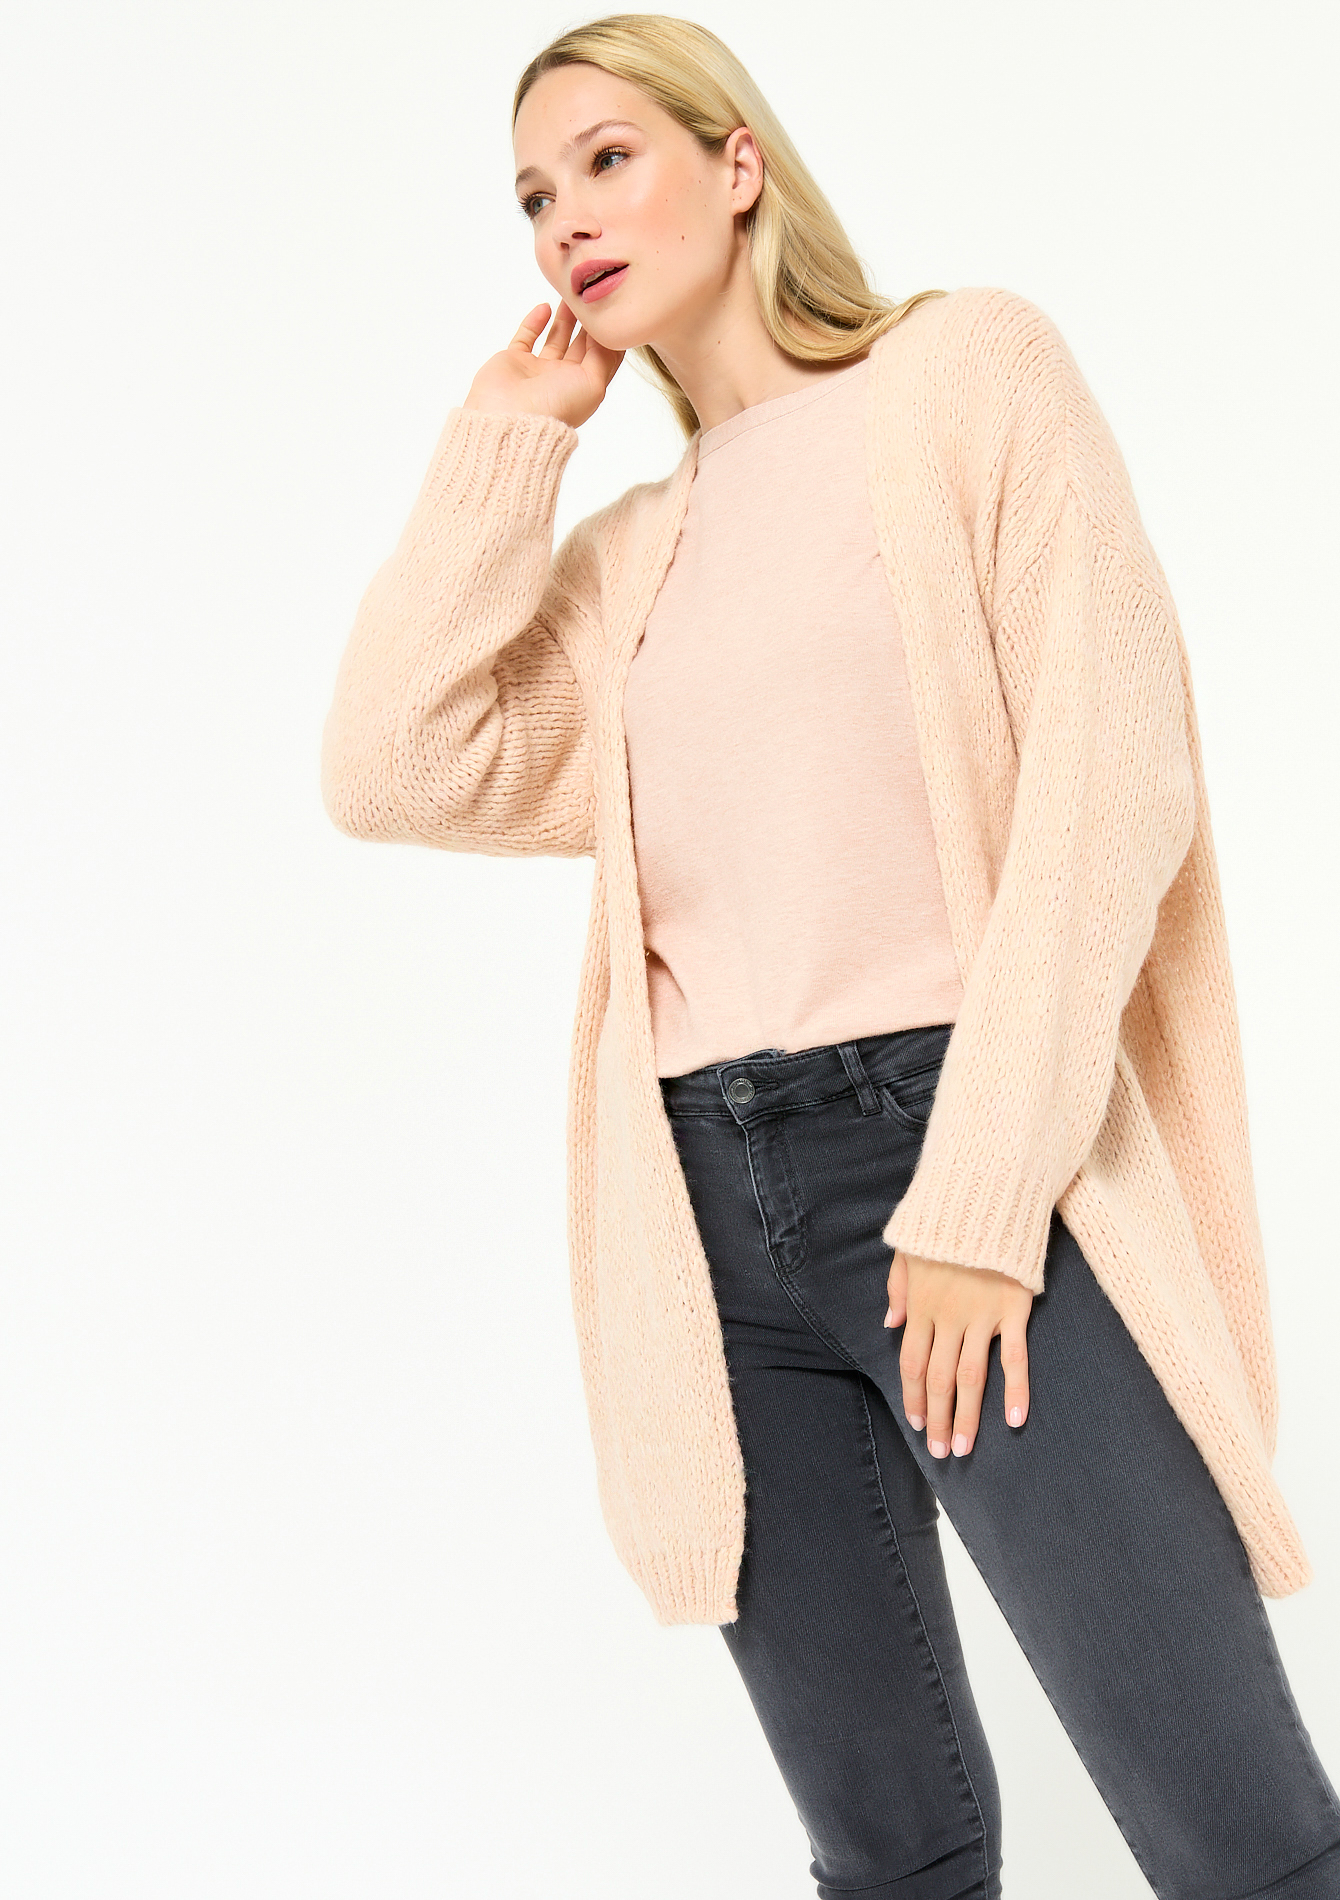 Knitted cardigan - NUDE PINK - 04800244_1301